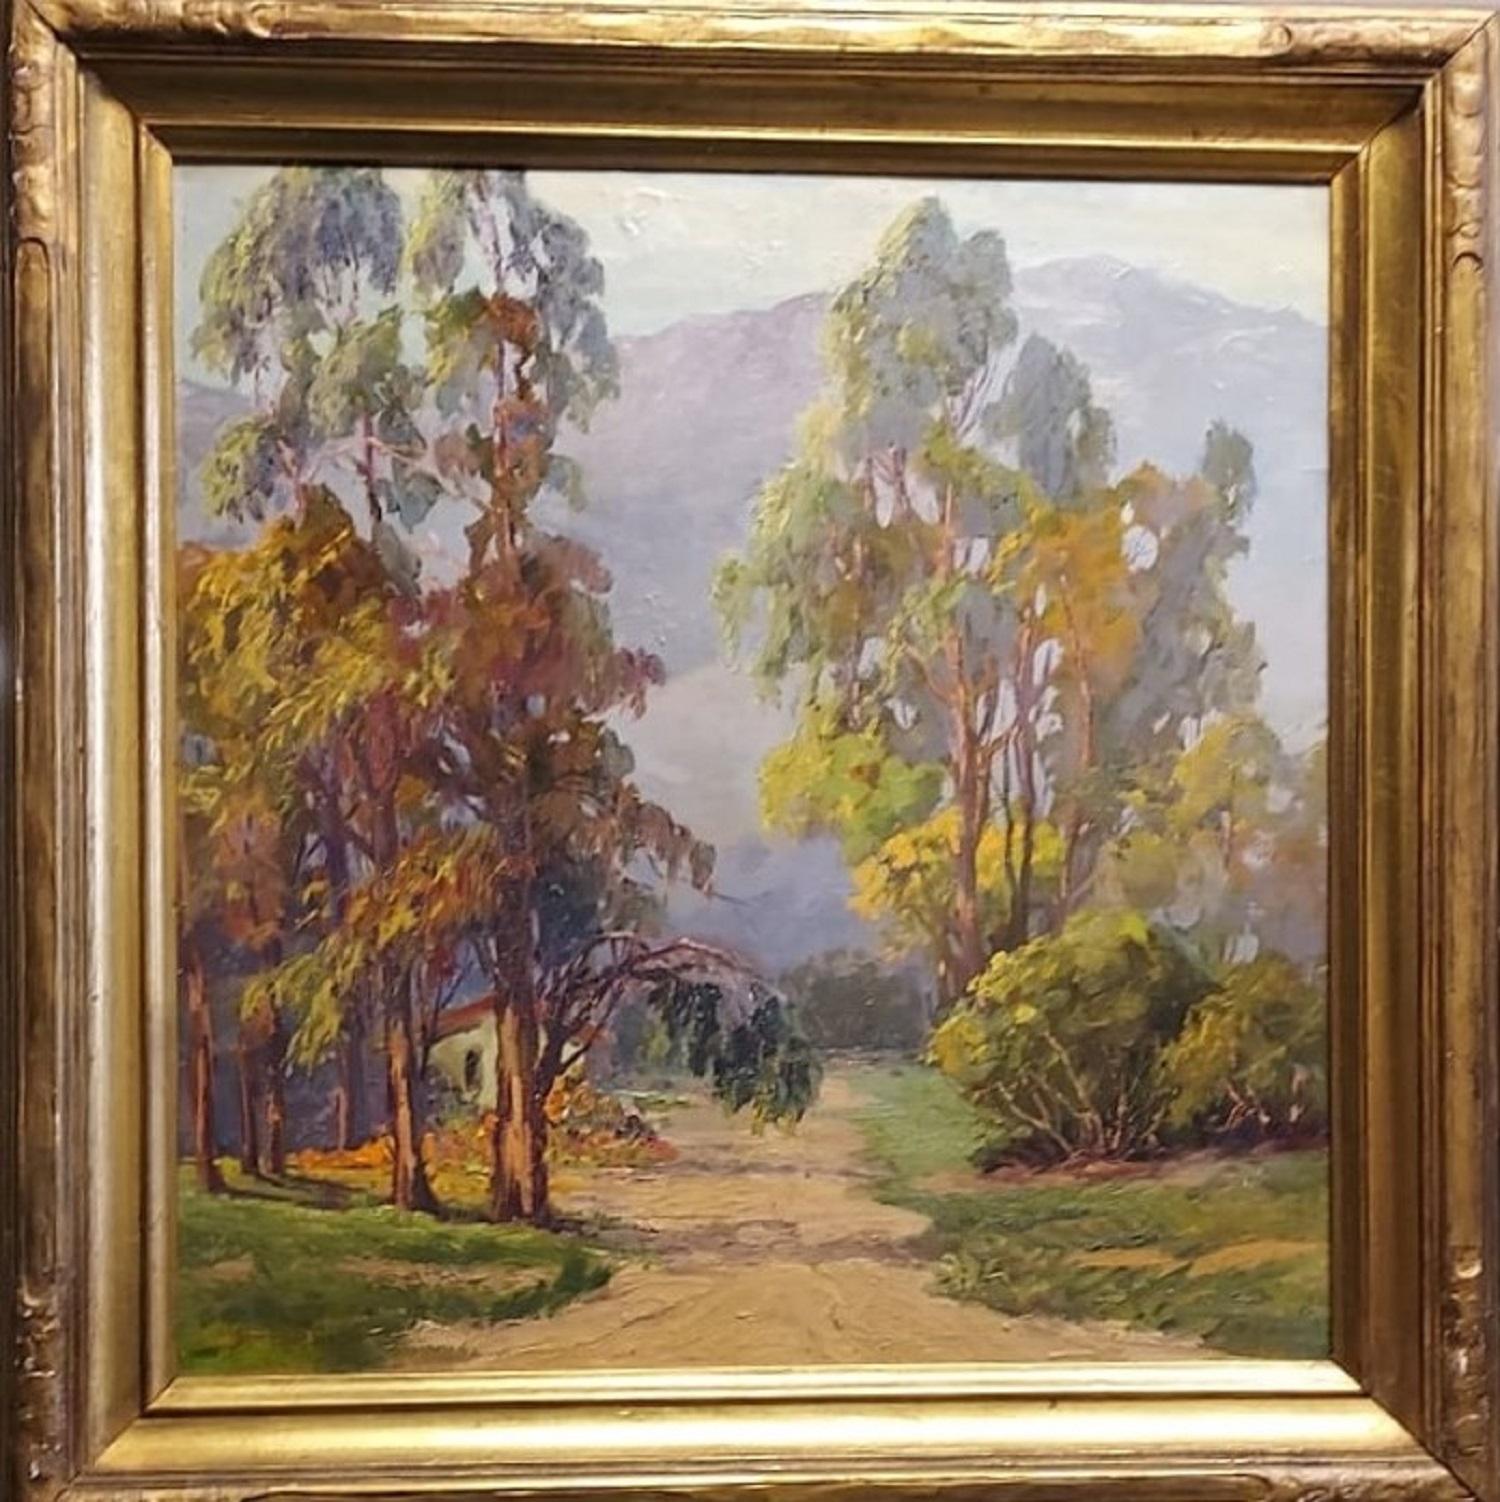 Sam Lyde Harris  Figurative Painting - Landscape  Pasadena in CA by Sam Lyde Harris